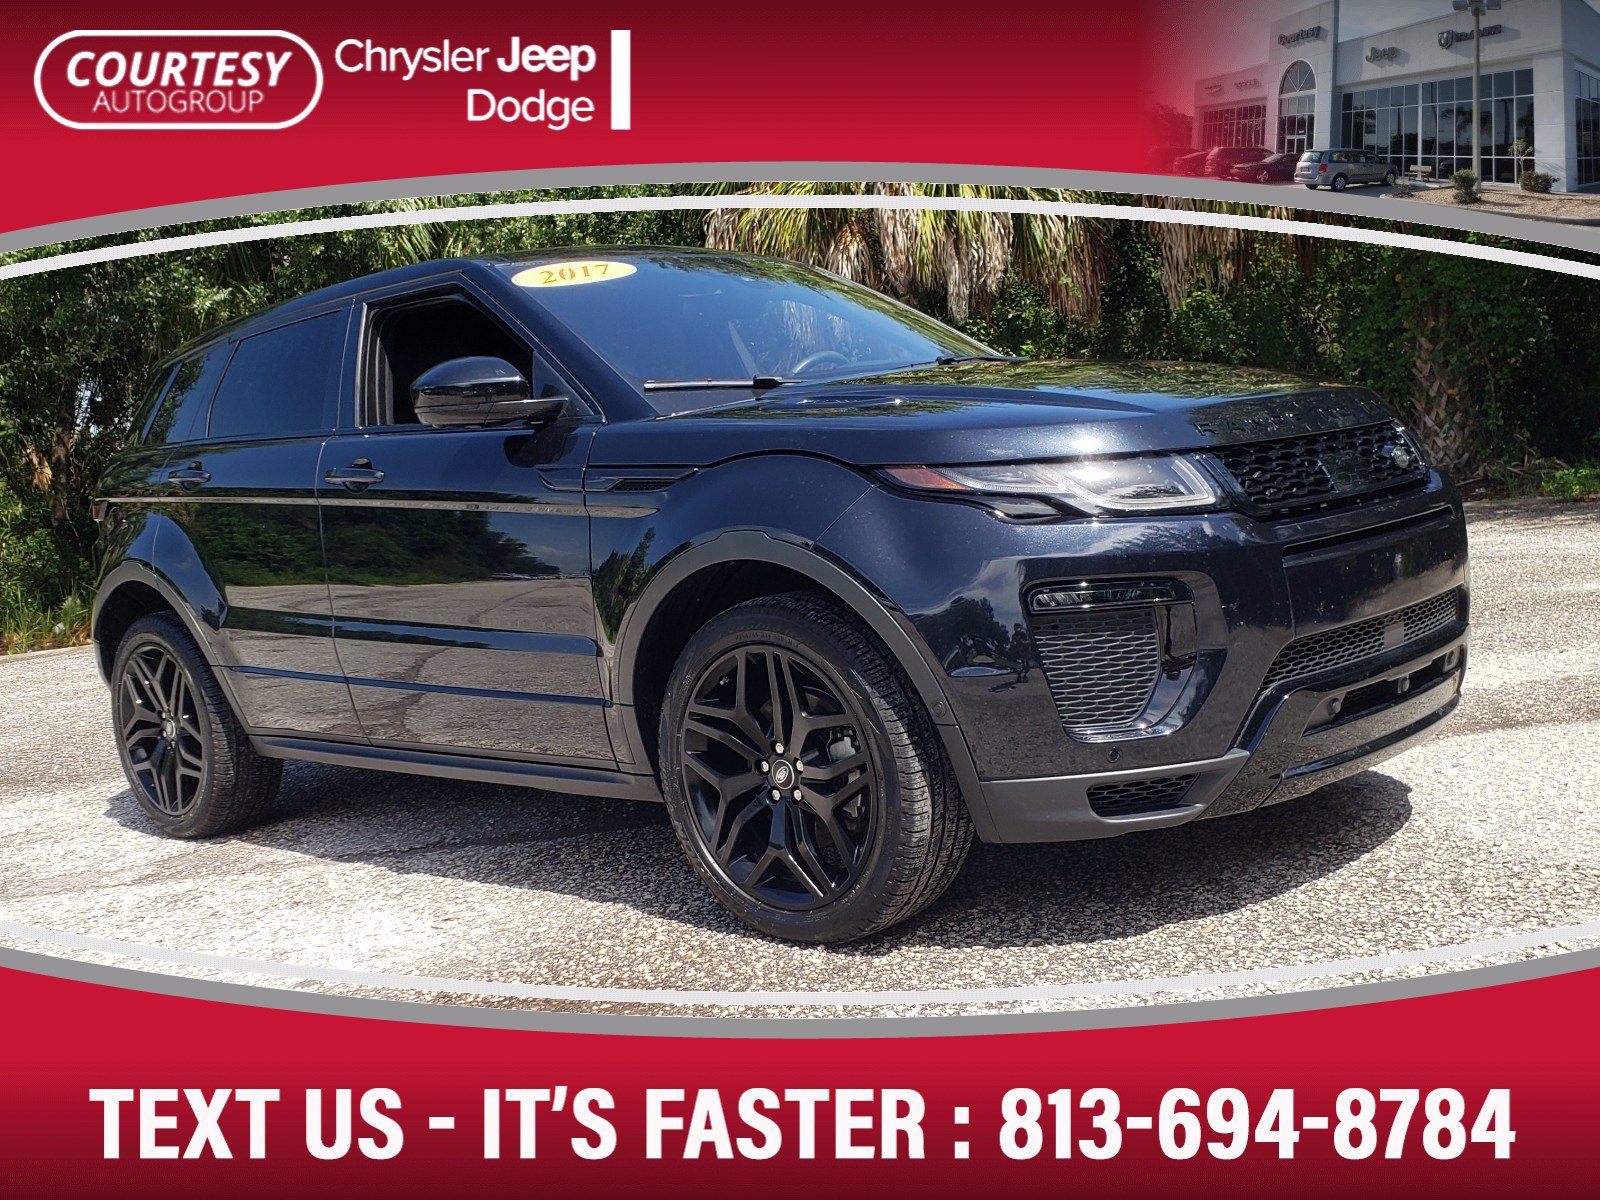 Range Rover Evoque Jacksonville Fl  : It�s Important To Carefully Check The Trims Of The Vehicle You�rE Interested In To Make Sure That You�rE Getting The Features You Want, Or That You�rE Not Overpaying For Features You Don�t Want.